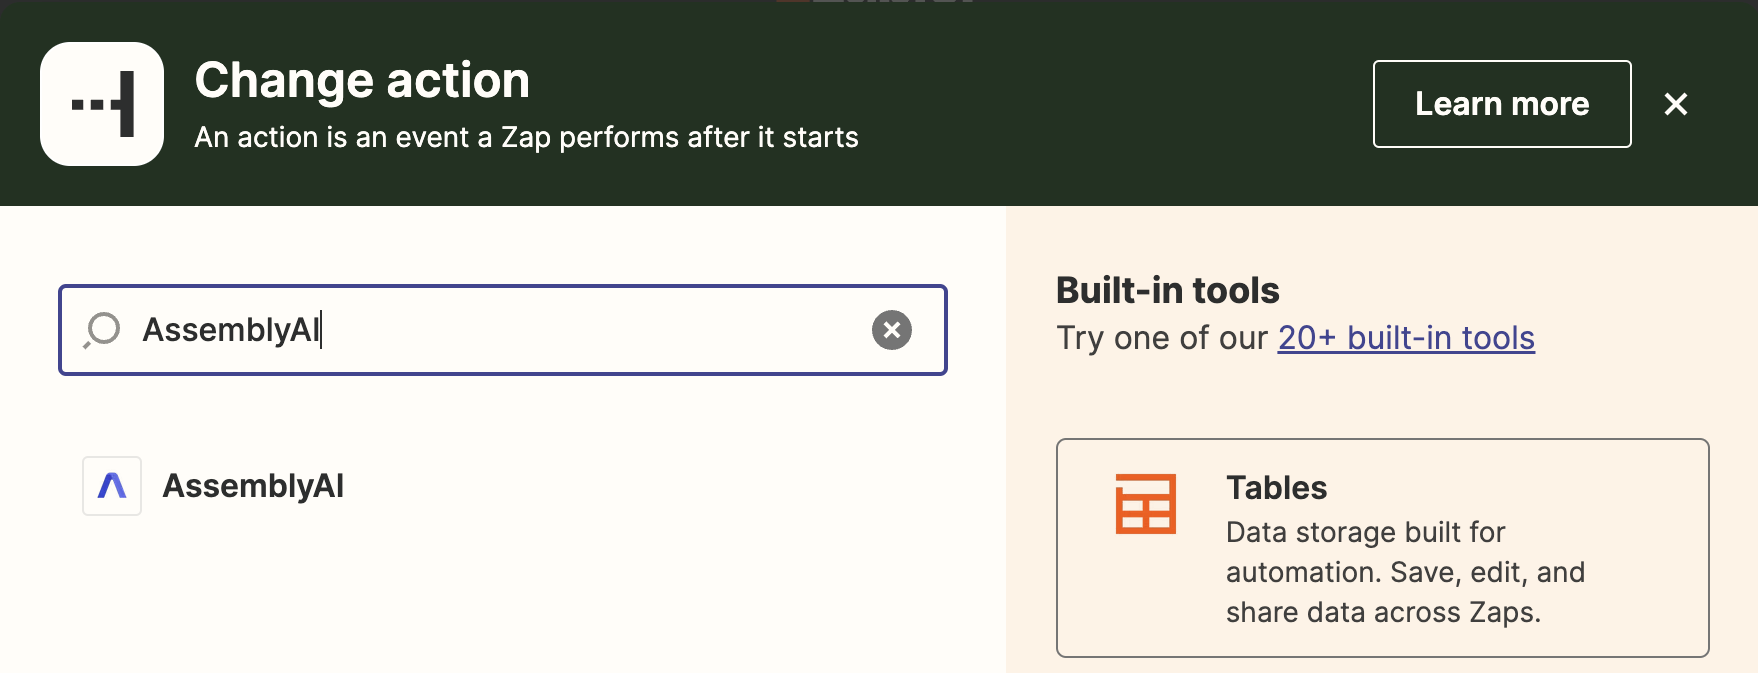 Change action Zapier screen, with AssemblyAI in search box.